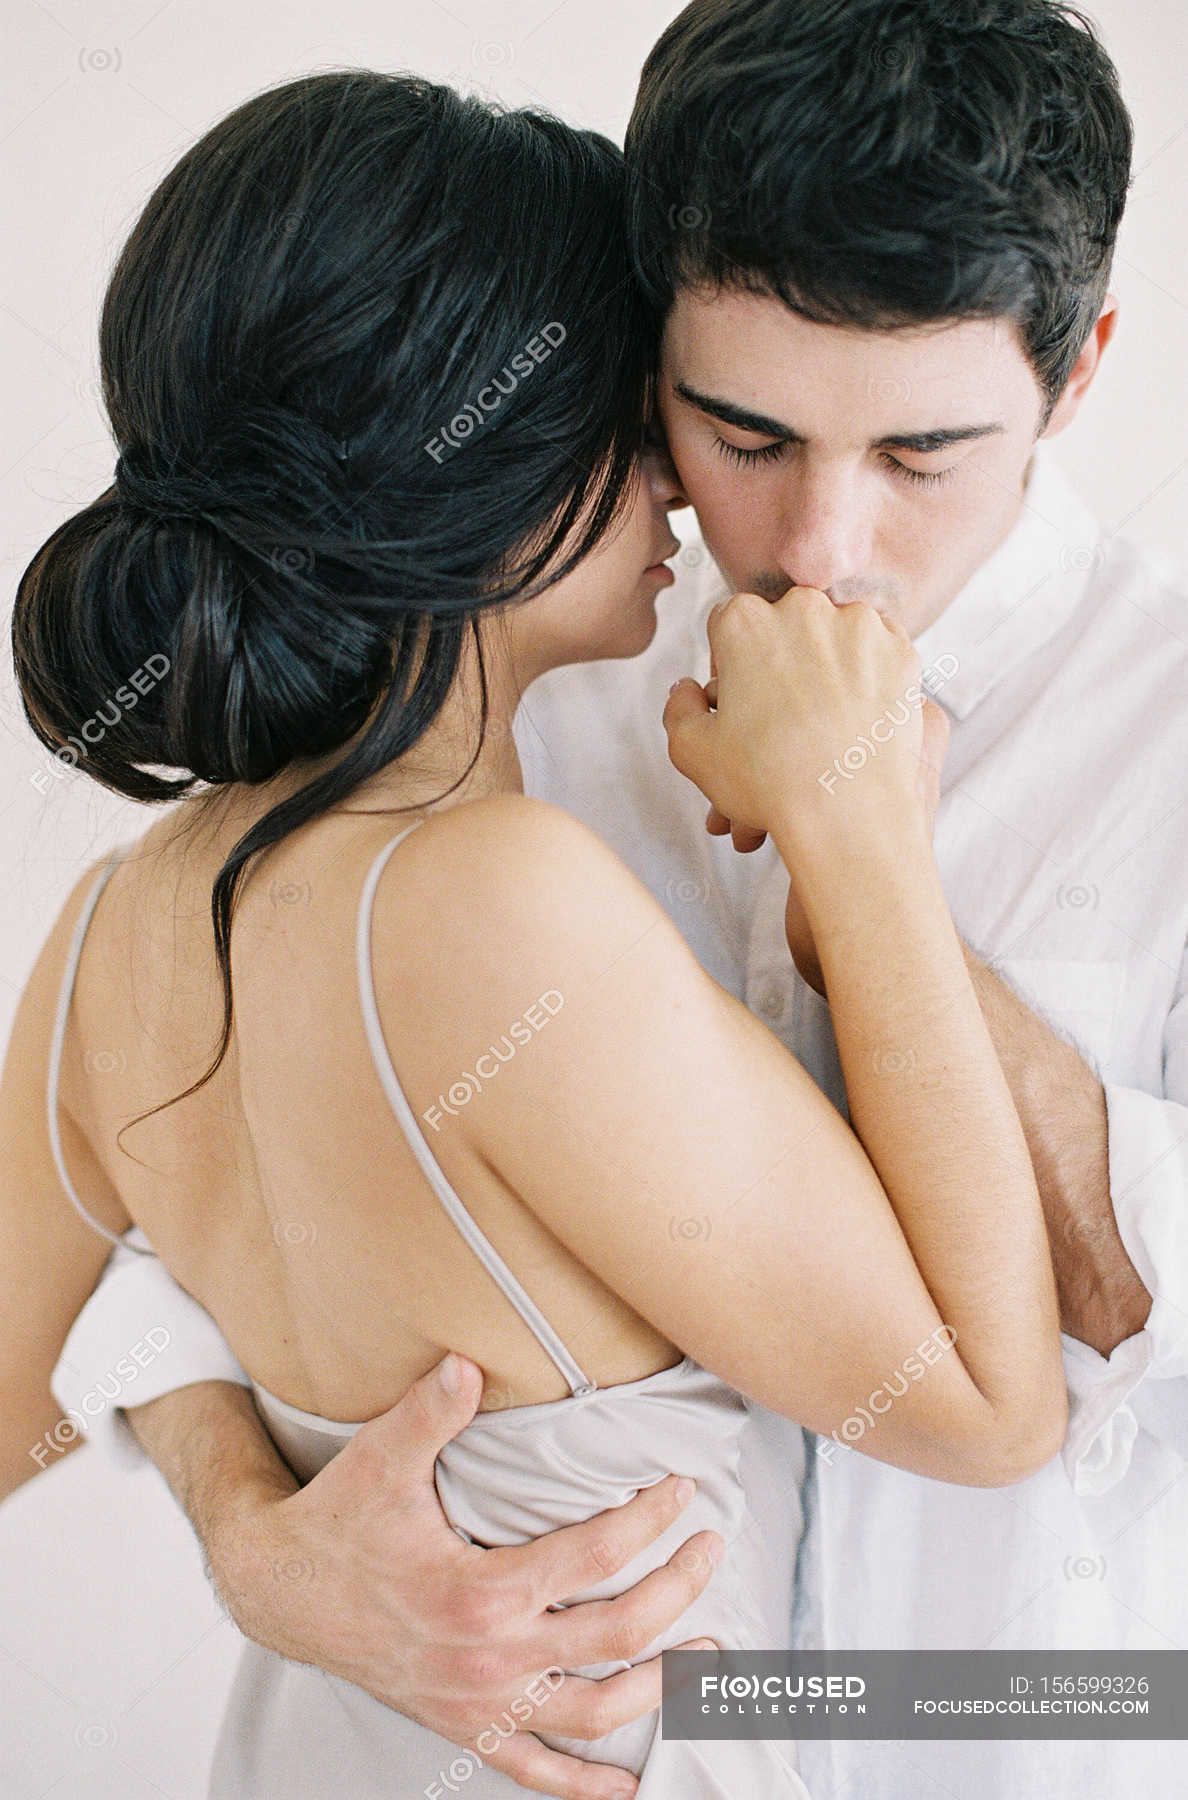 A where to woman kiss Best Kissing